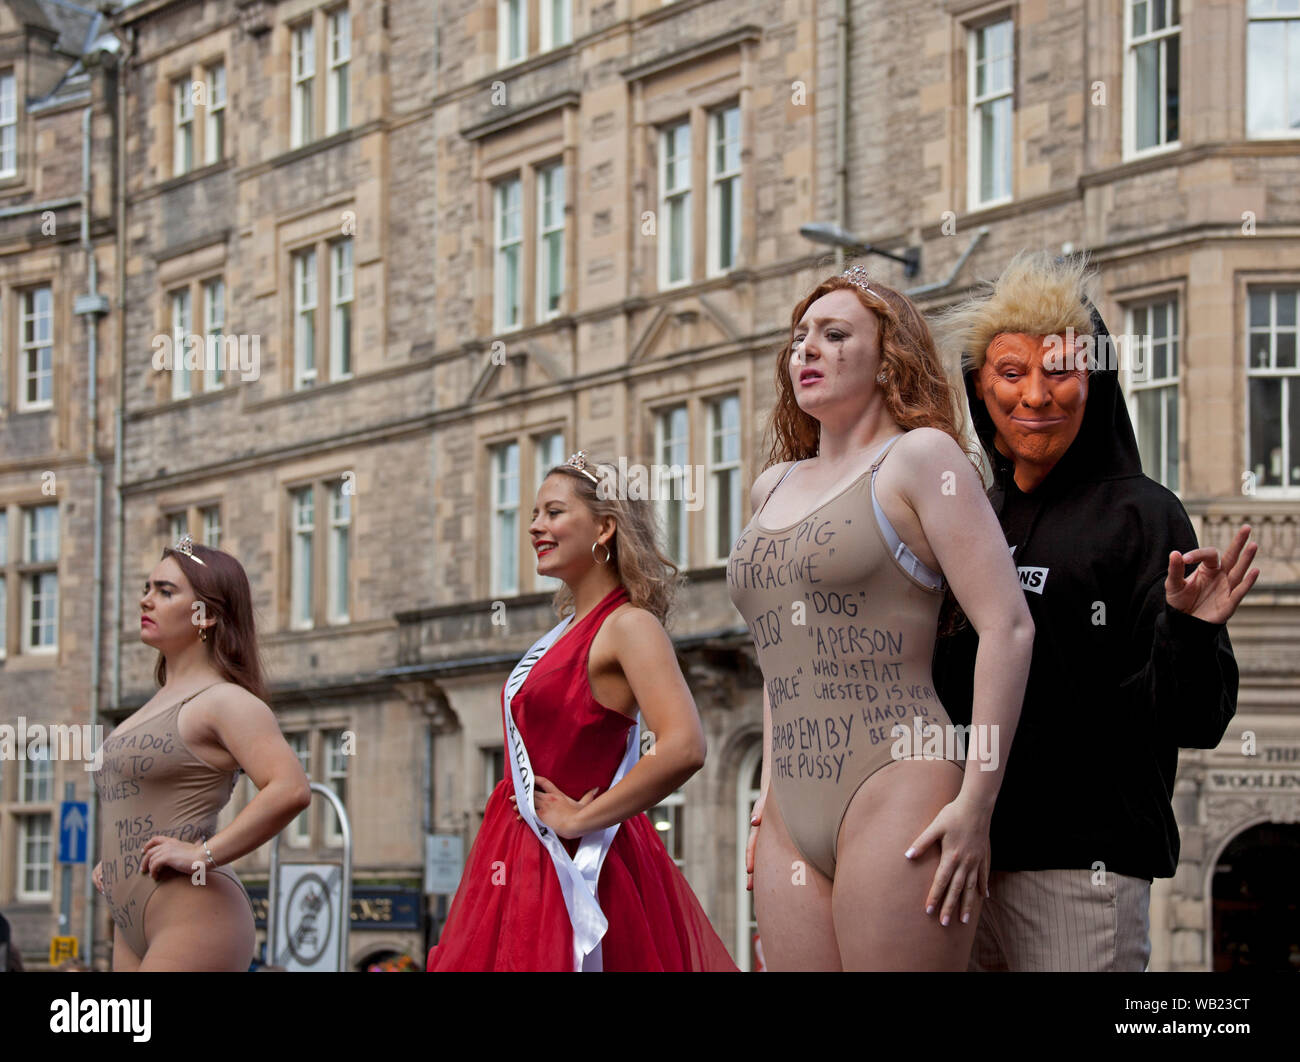 Royal Mile, Edinburgh, Scotland, UK. 23rd August 2019. Cast members from Beauty is Pain. at Paradise in the Vaults. Beauty is Pain is a political performance art piece surrounding Donald Trump's support of the Miss USA pageants and treatment of women in the mainstream media. It delves into the superficial nature of the pageants and reveals the inner workings of the industry. Stock Photo